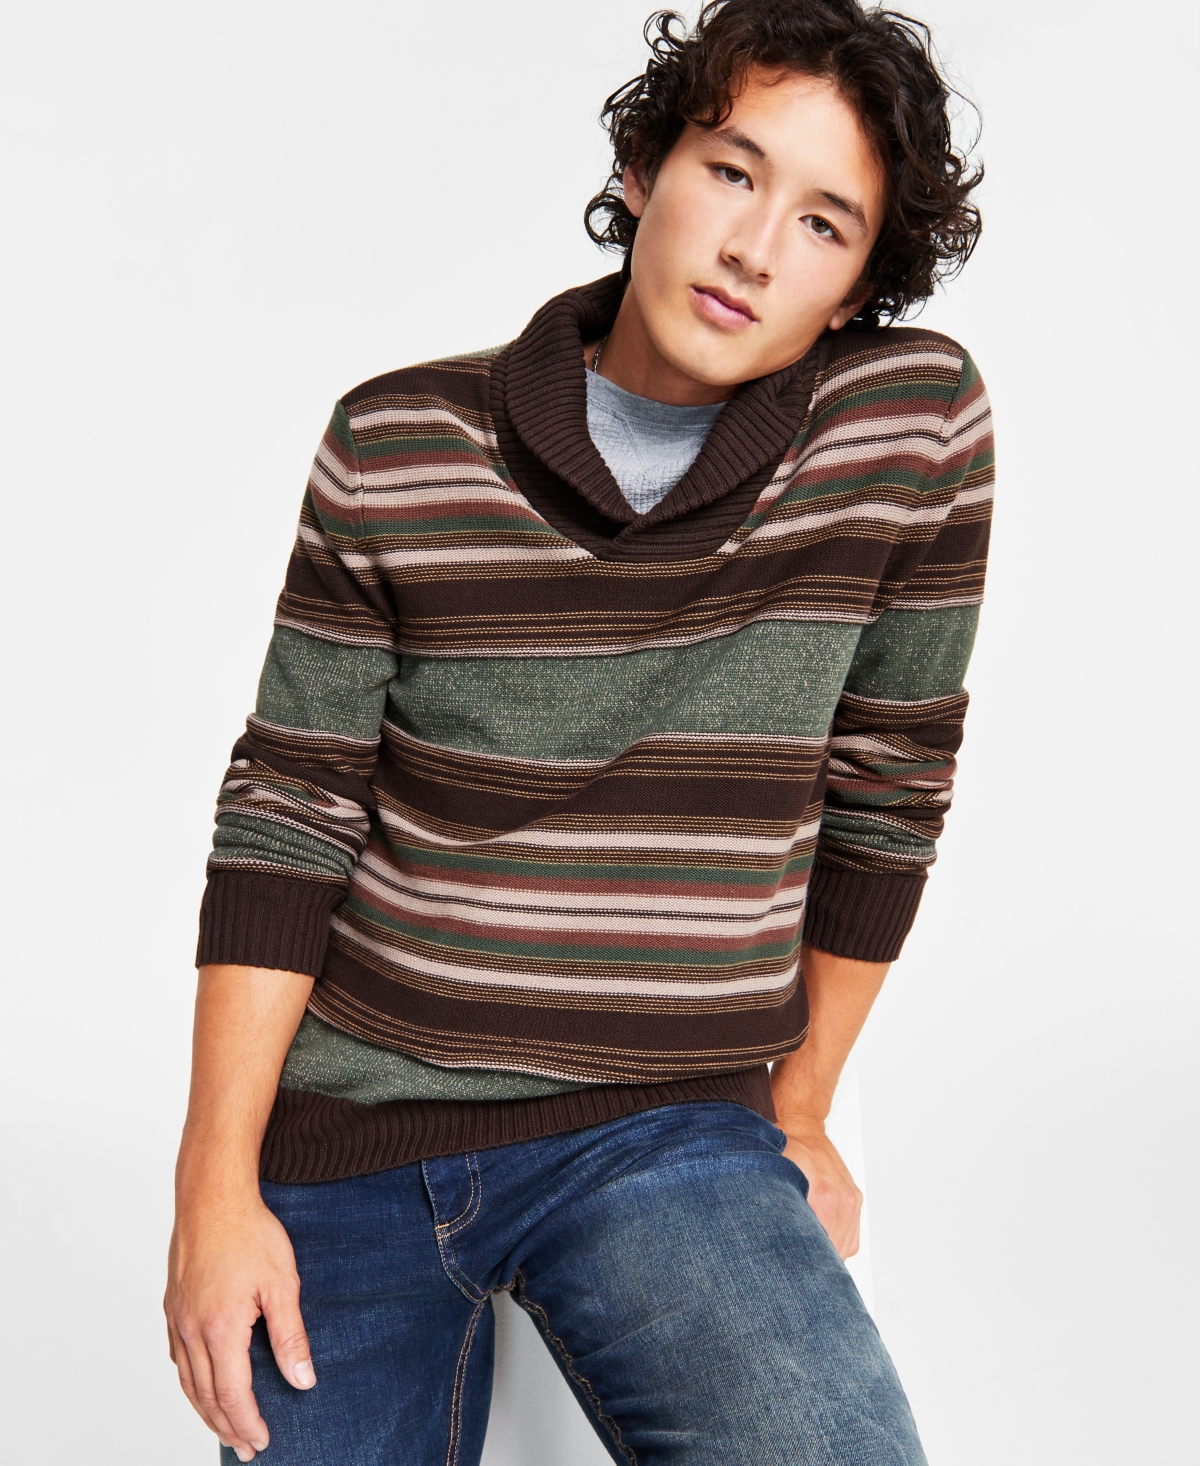 Sun + Stone Men's Apparel: Blanket Stripe Shawl Sweater (Pebble Heather) $16.73, Plaid Long-Sleeve Shirt $15.03 & More + Free Store Pickup at Macy's or F/S on $25+